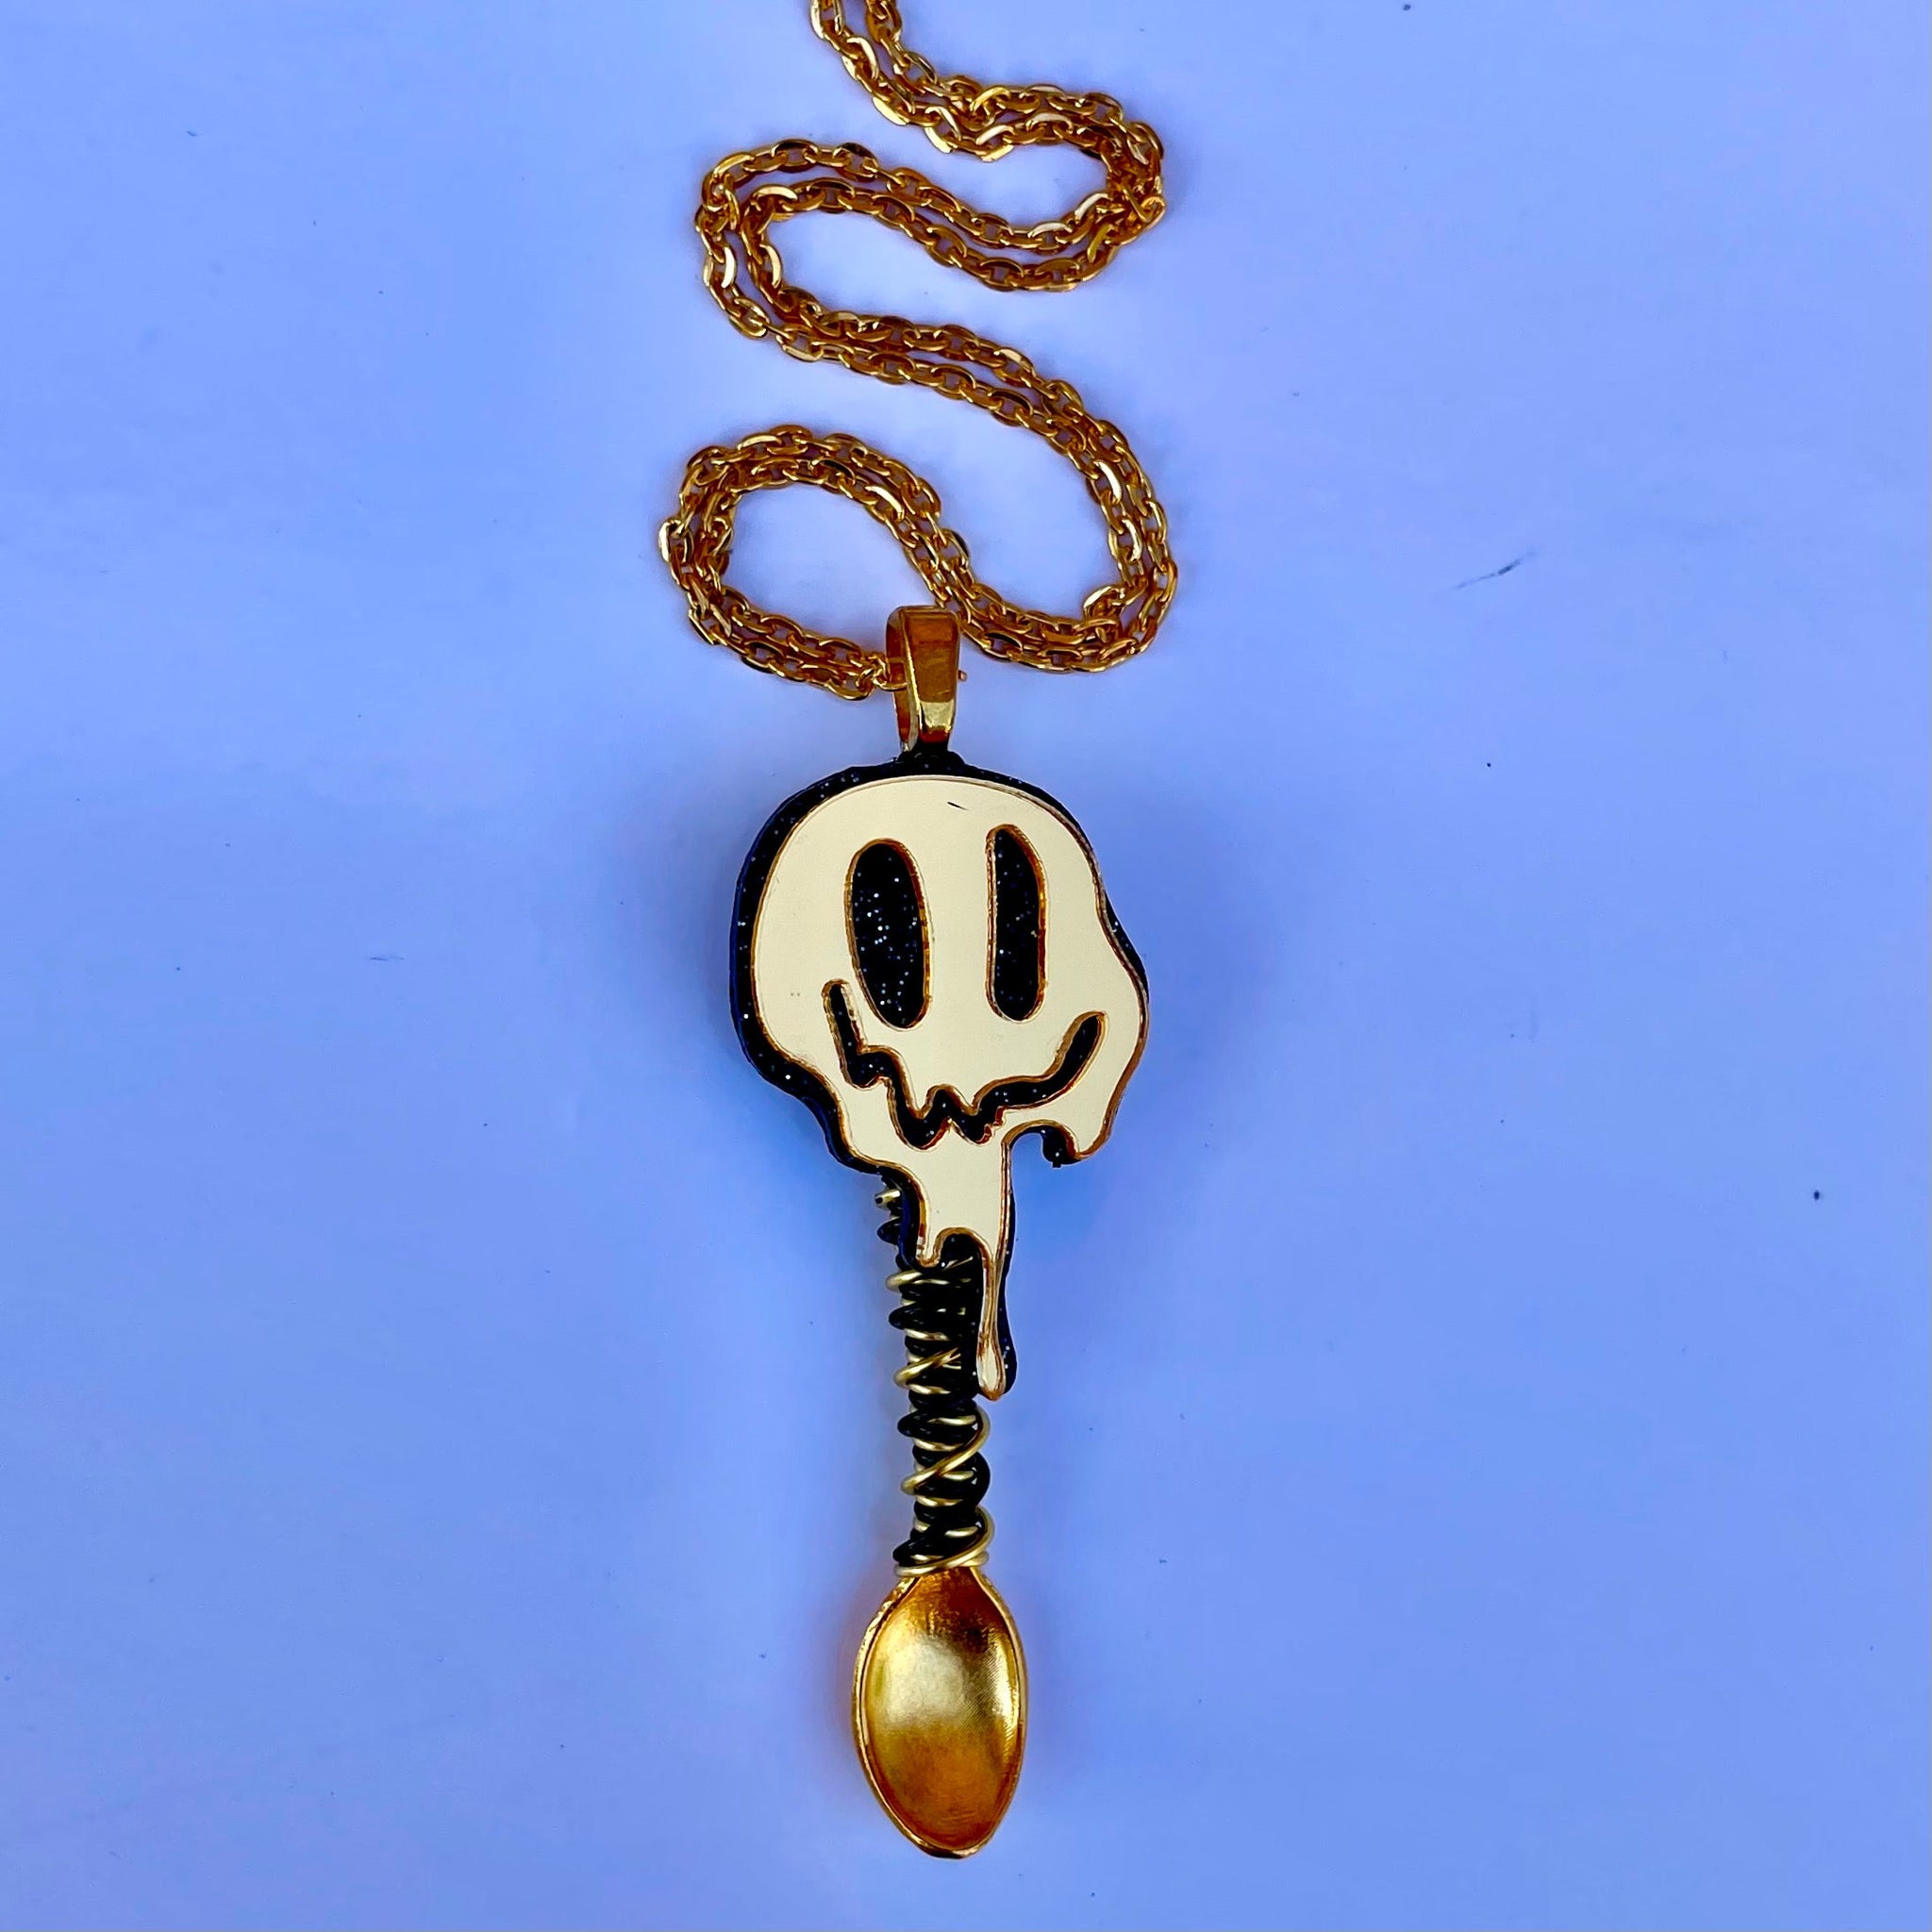 Container Necklace with Spoon – Rave Fashion Goddess